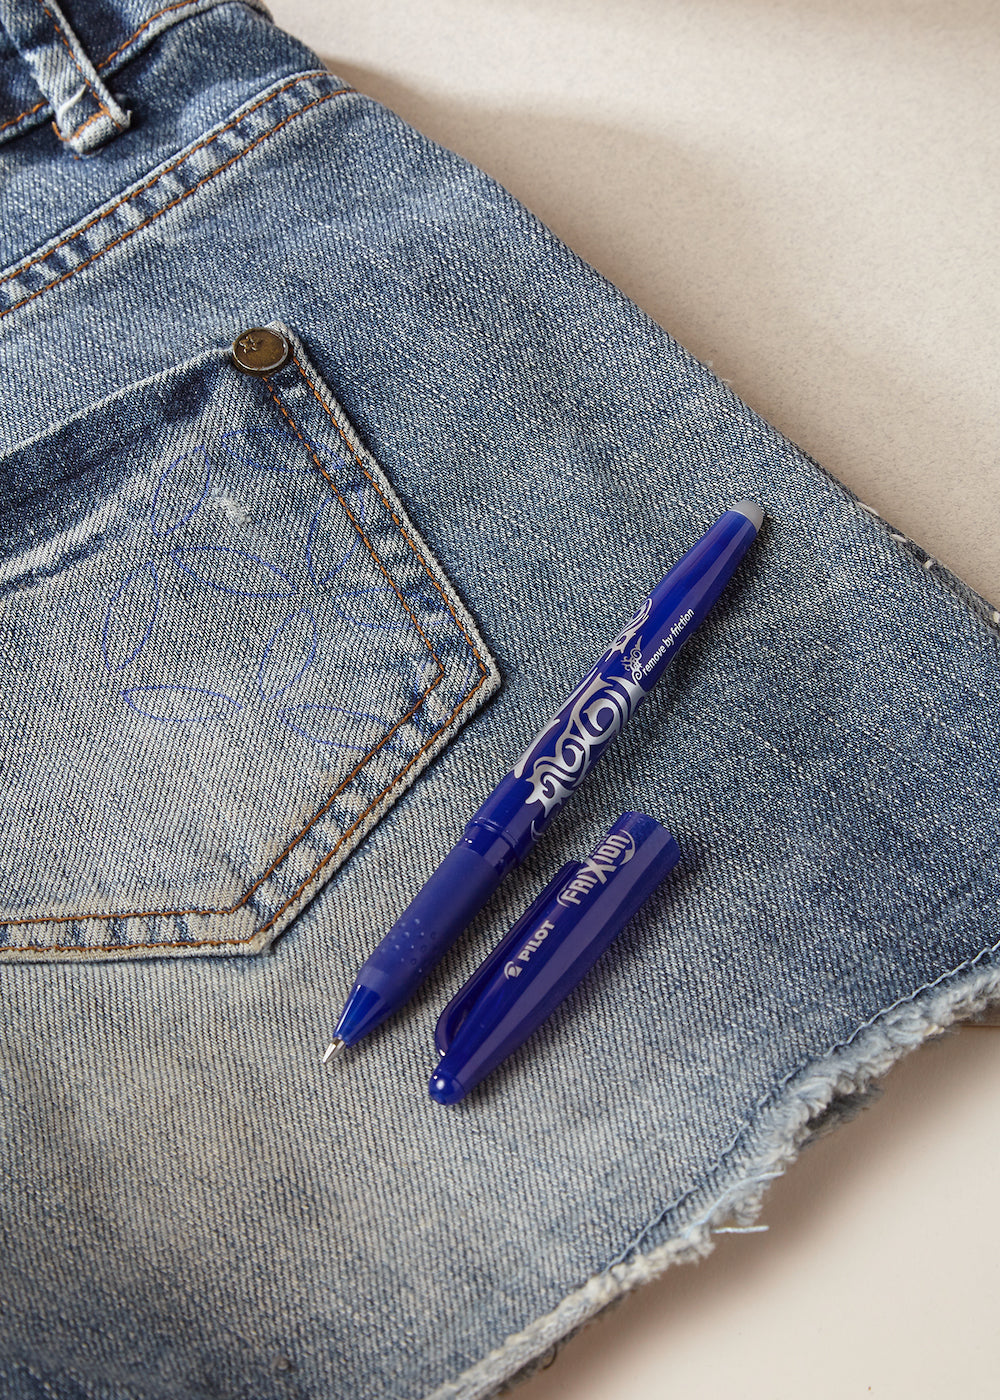 Pilot Frixion pens - my newest favourite sewing trick - The Dreamstress